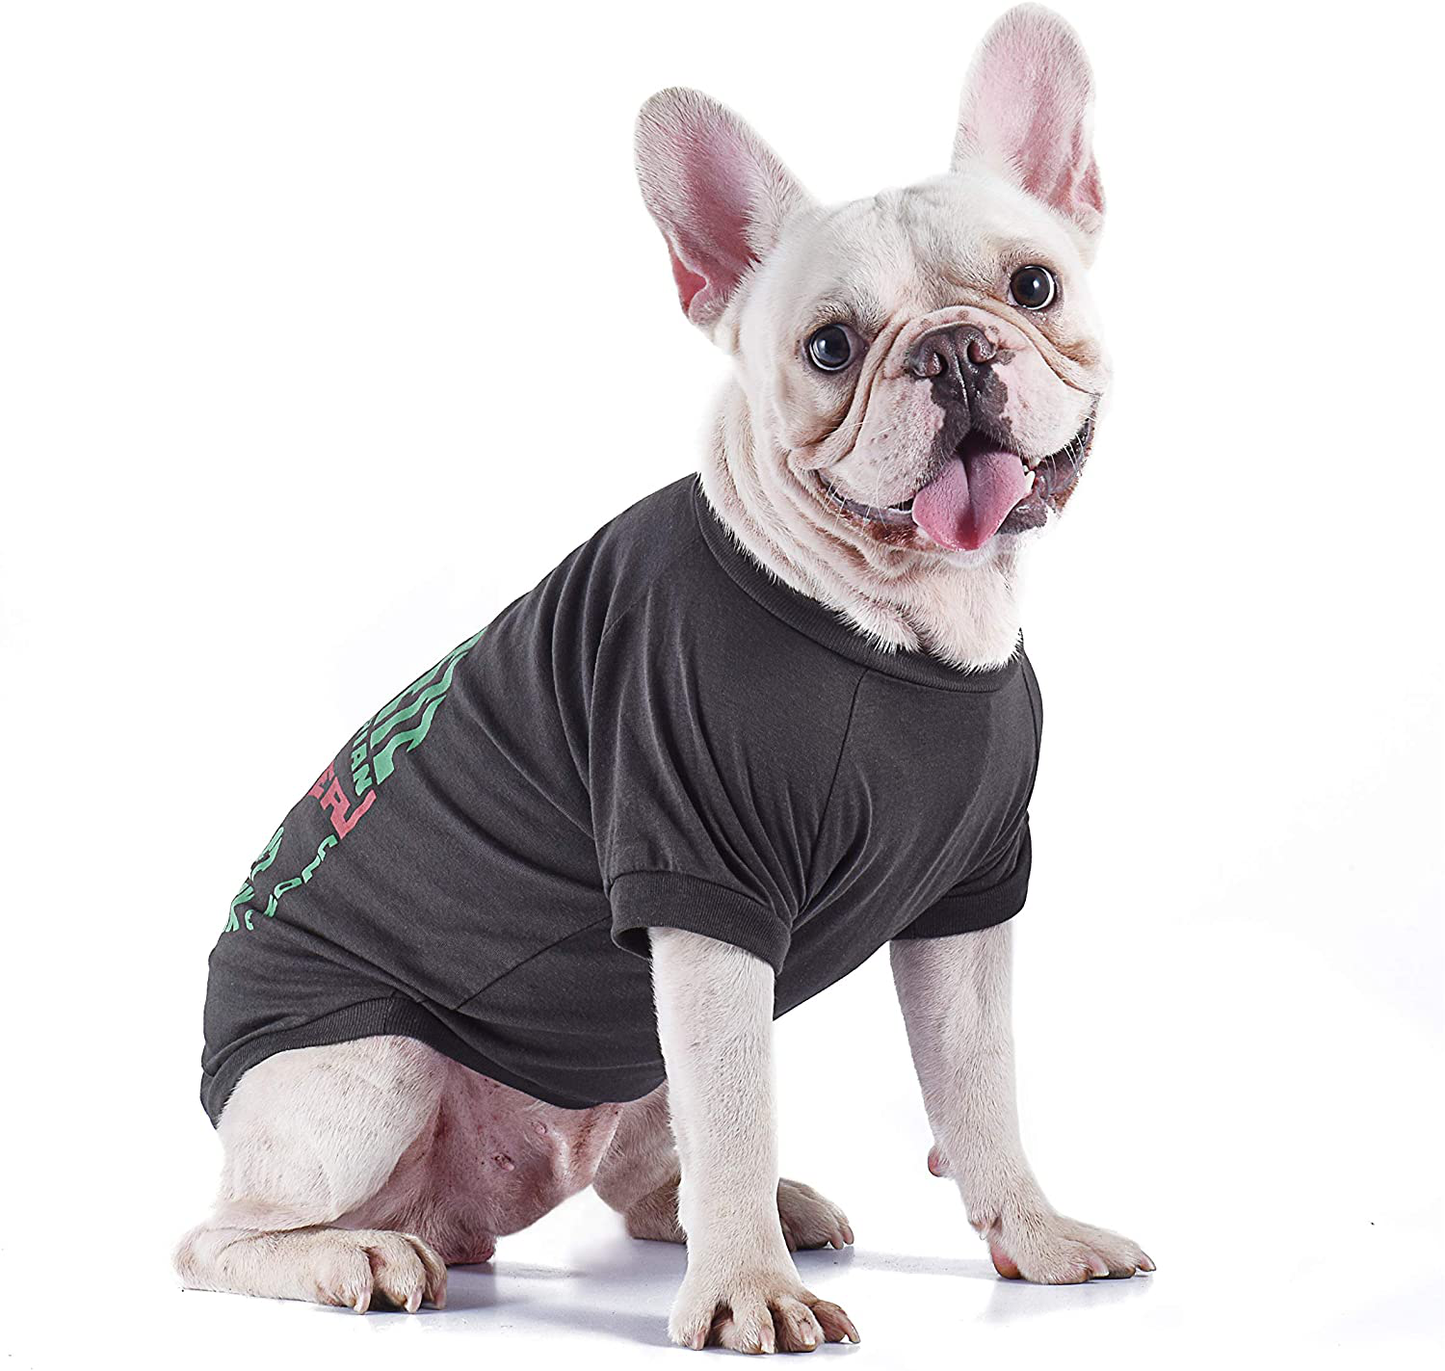 Star Wars for Pets Boba Fett Dog Tee | Star Wars Dog Shirt for Small Dogs | Size Small | Soft, Cute, and Comfortable Dog Clothing and Apparel, Available in Multiple Sizes Animals & Pet Supplies > Pet Supplies > Cat Supplies > Cat Apparel Fetch for Pets   